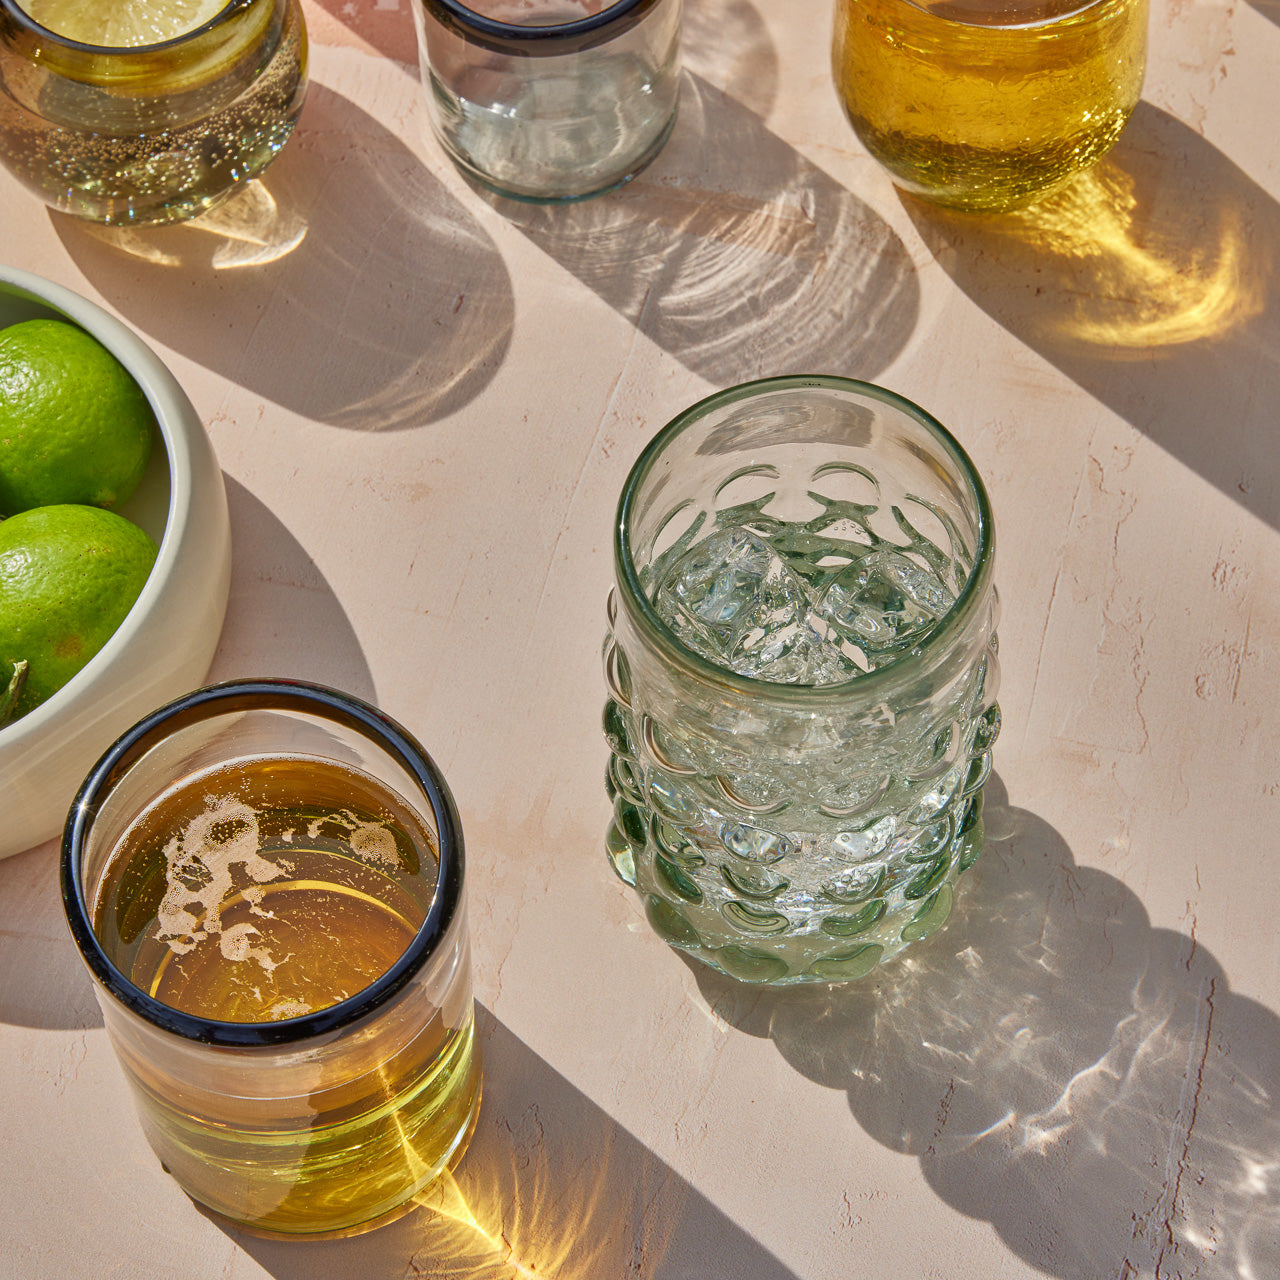 An array of handblown glasses made in Mexico.